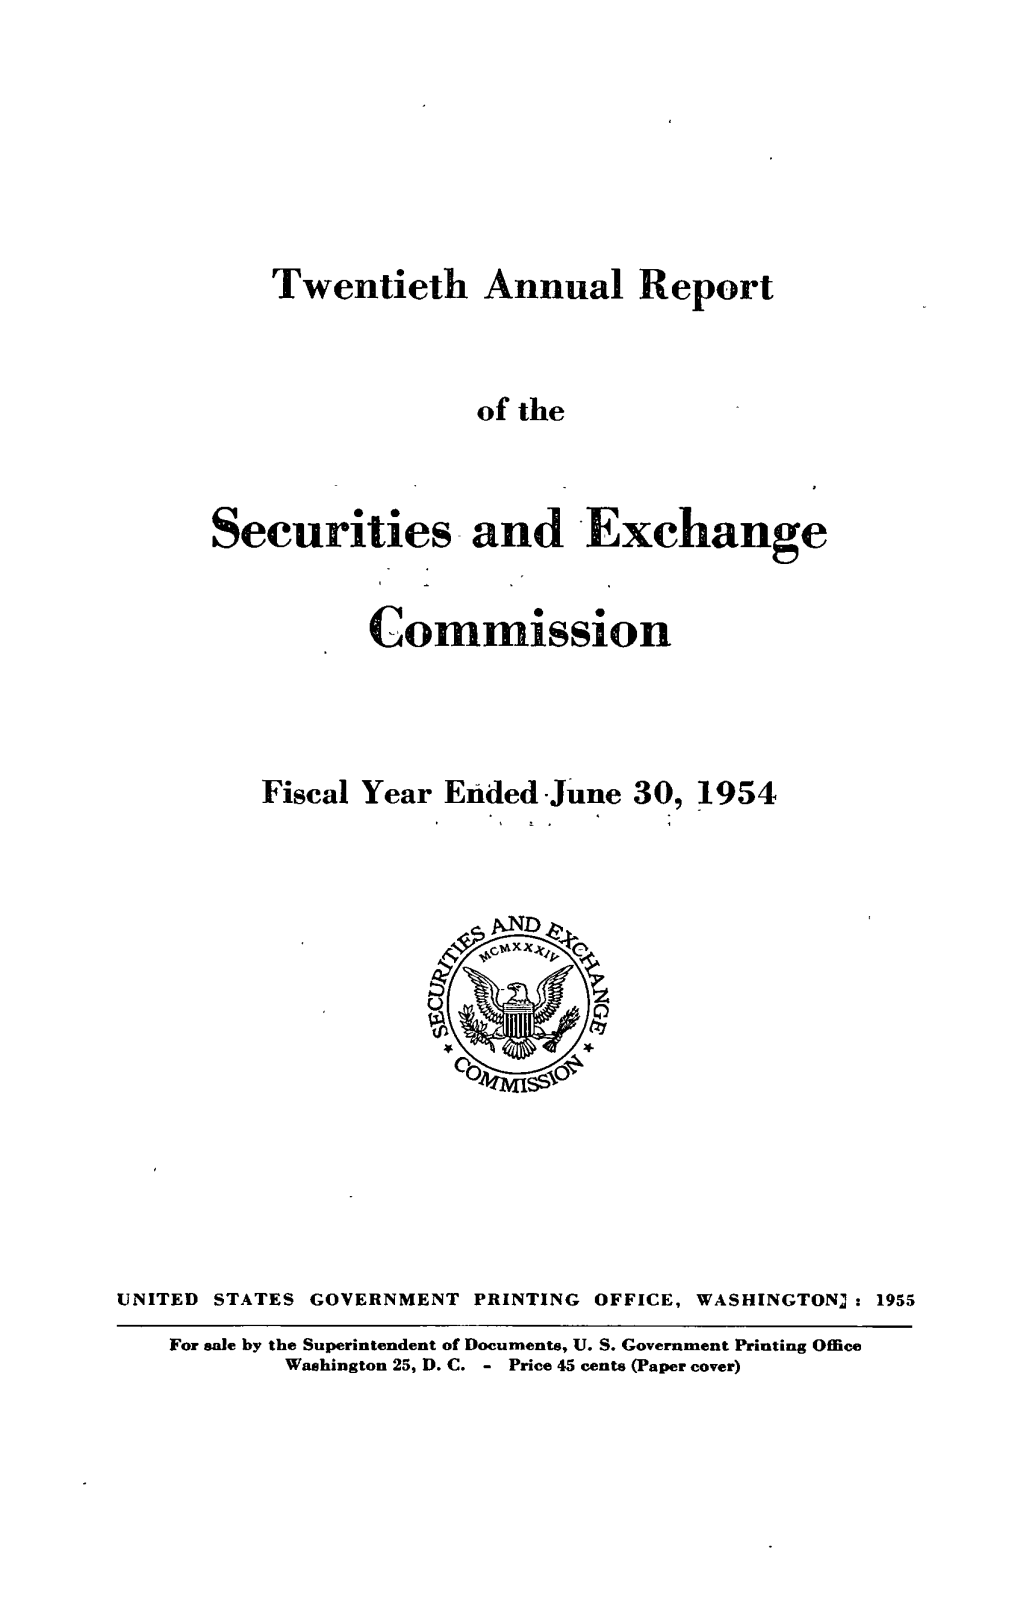 Securities and 'Exchange Commission